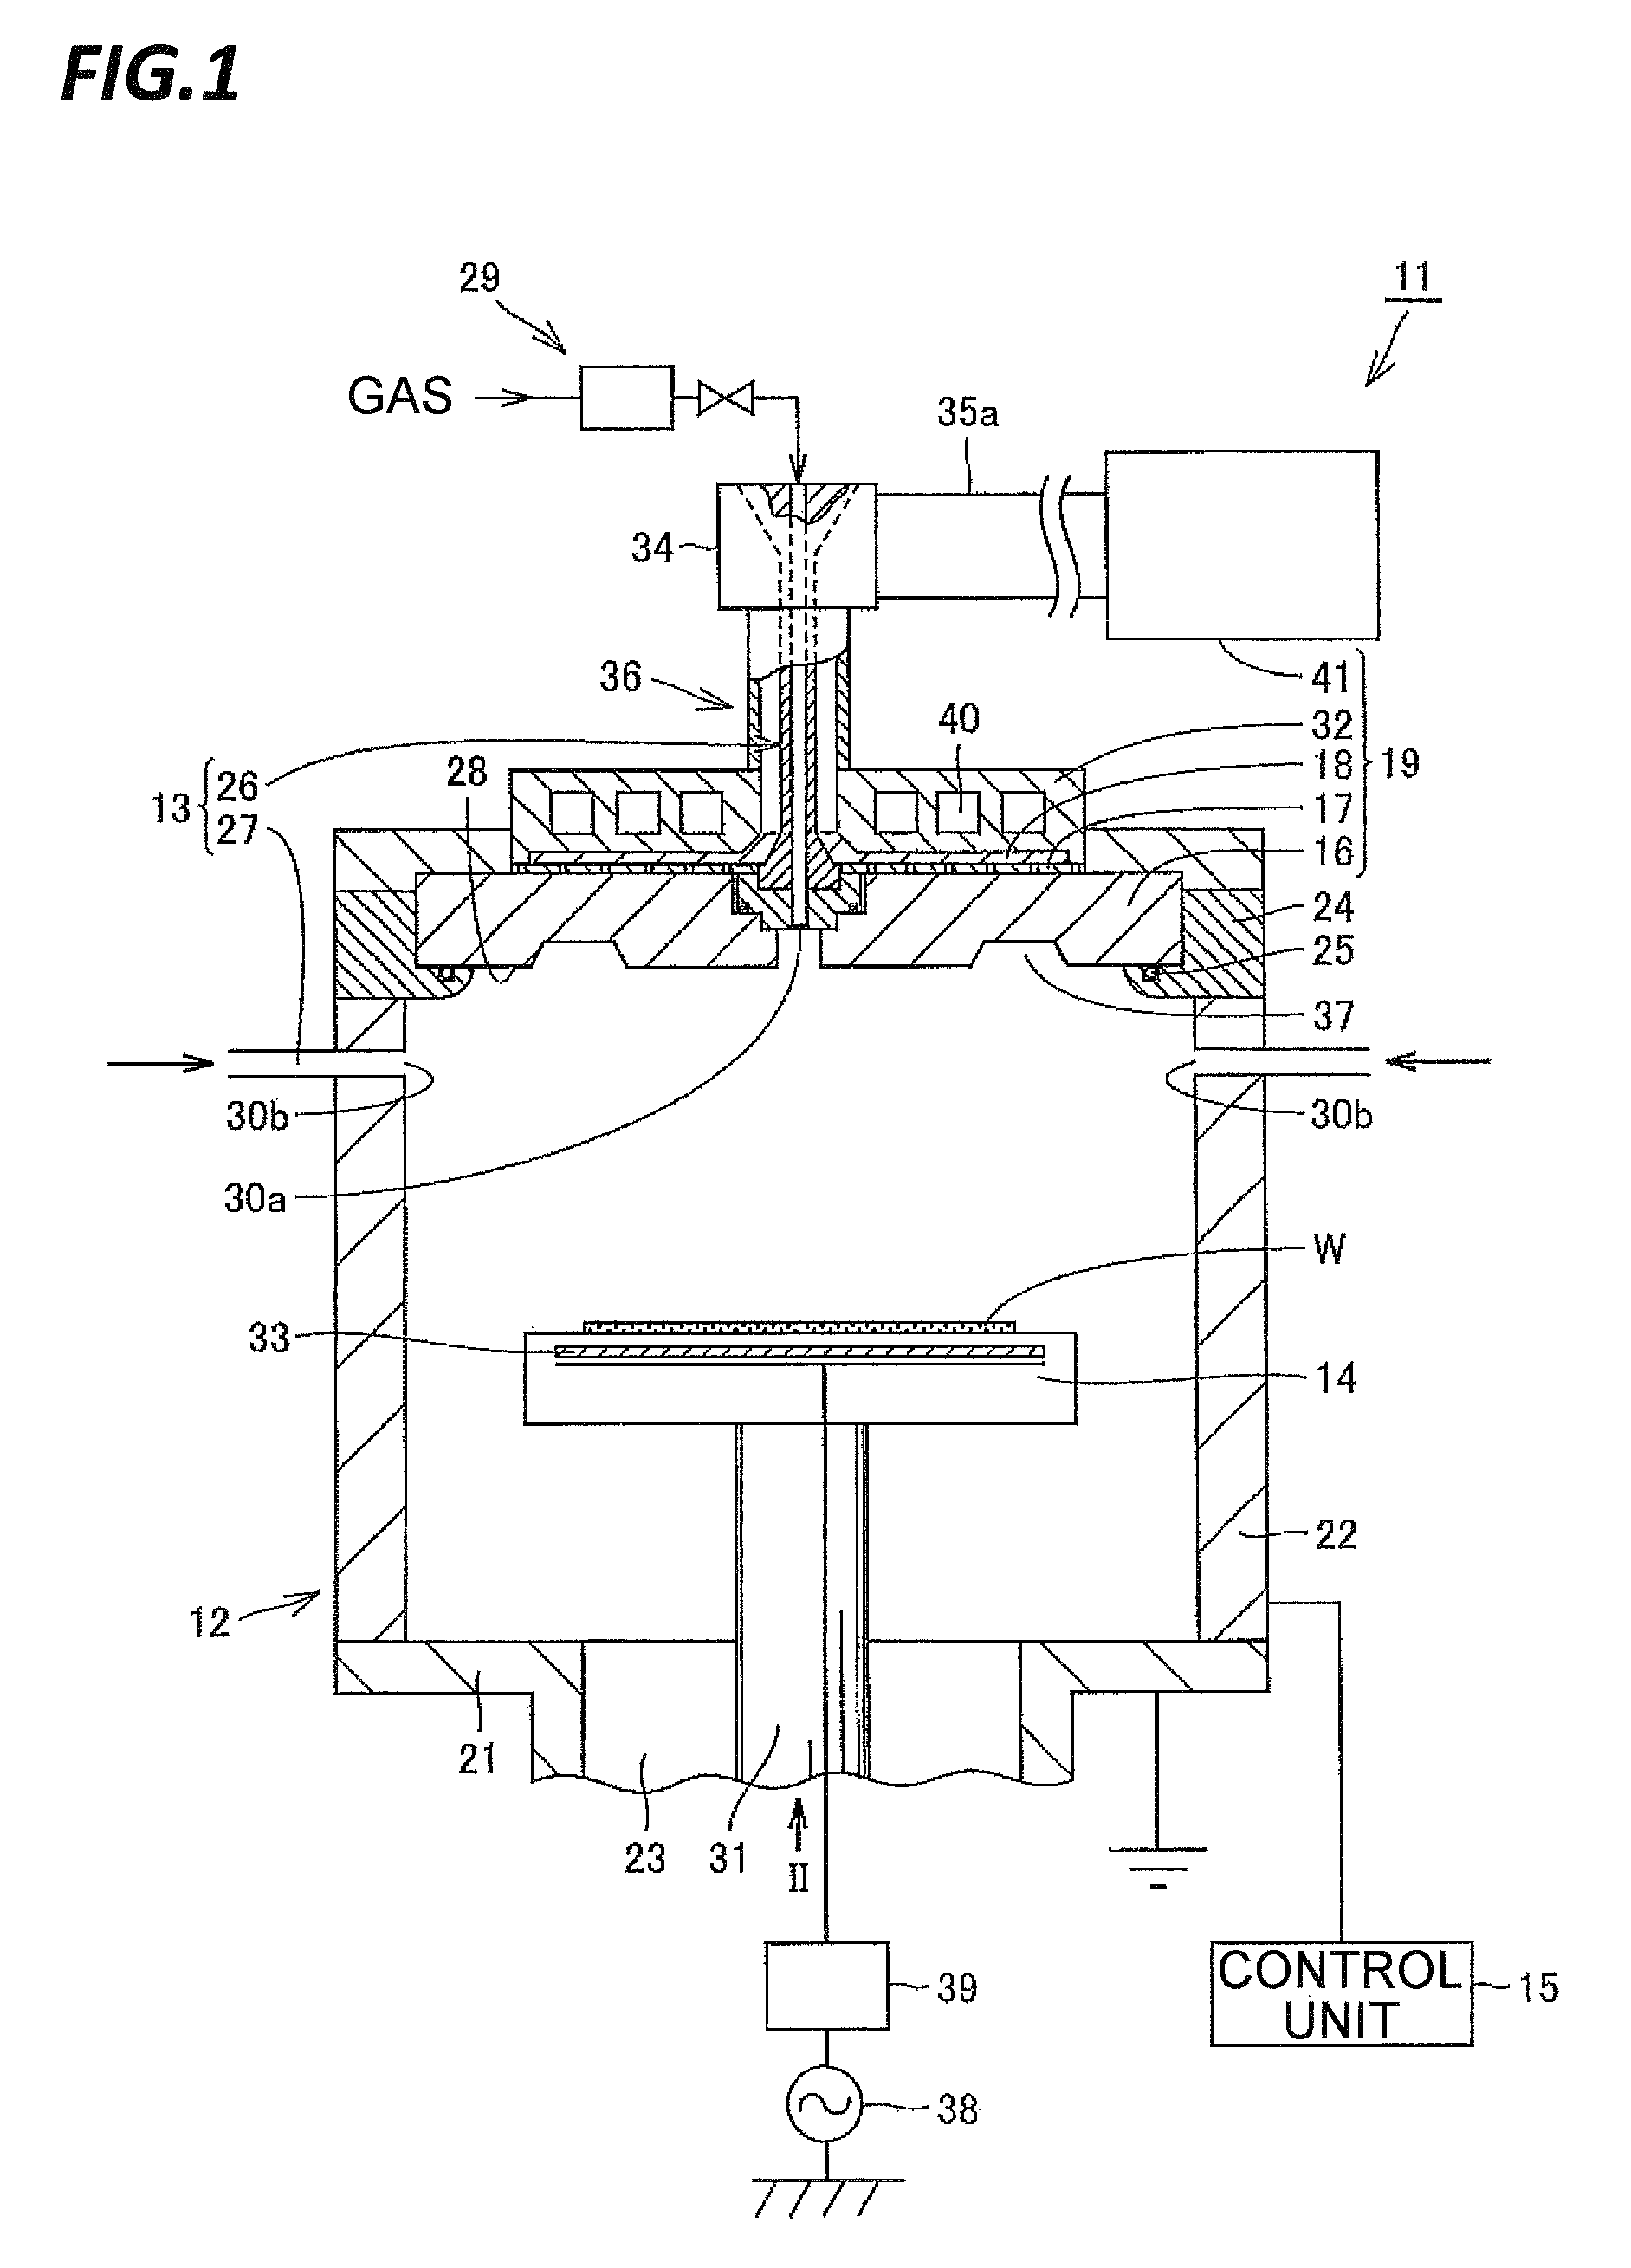 Plasma processing apparatus and high frequency generator